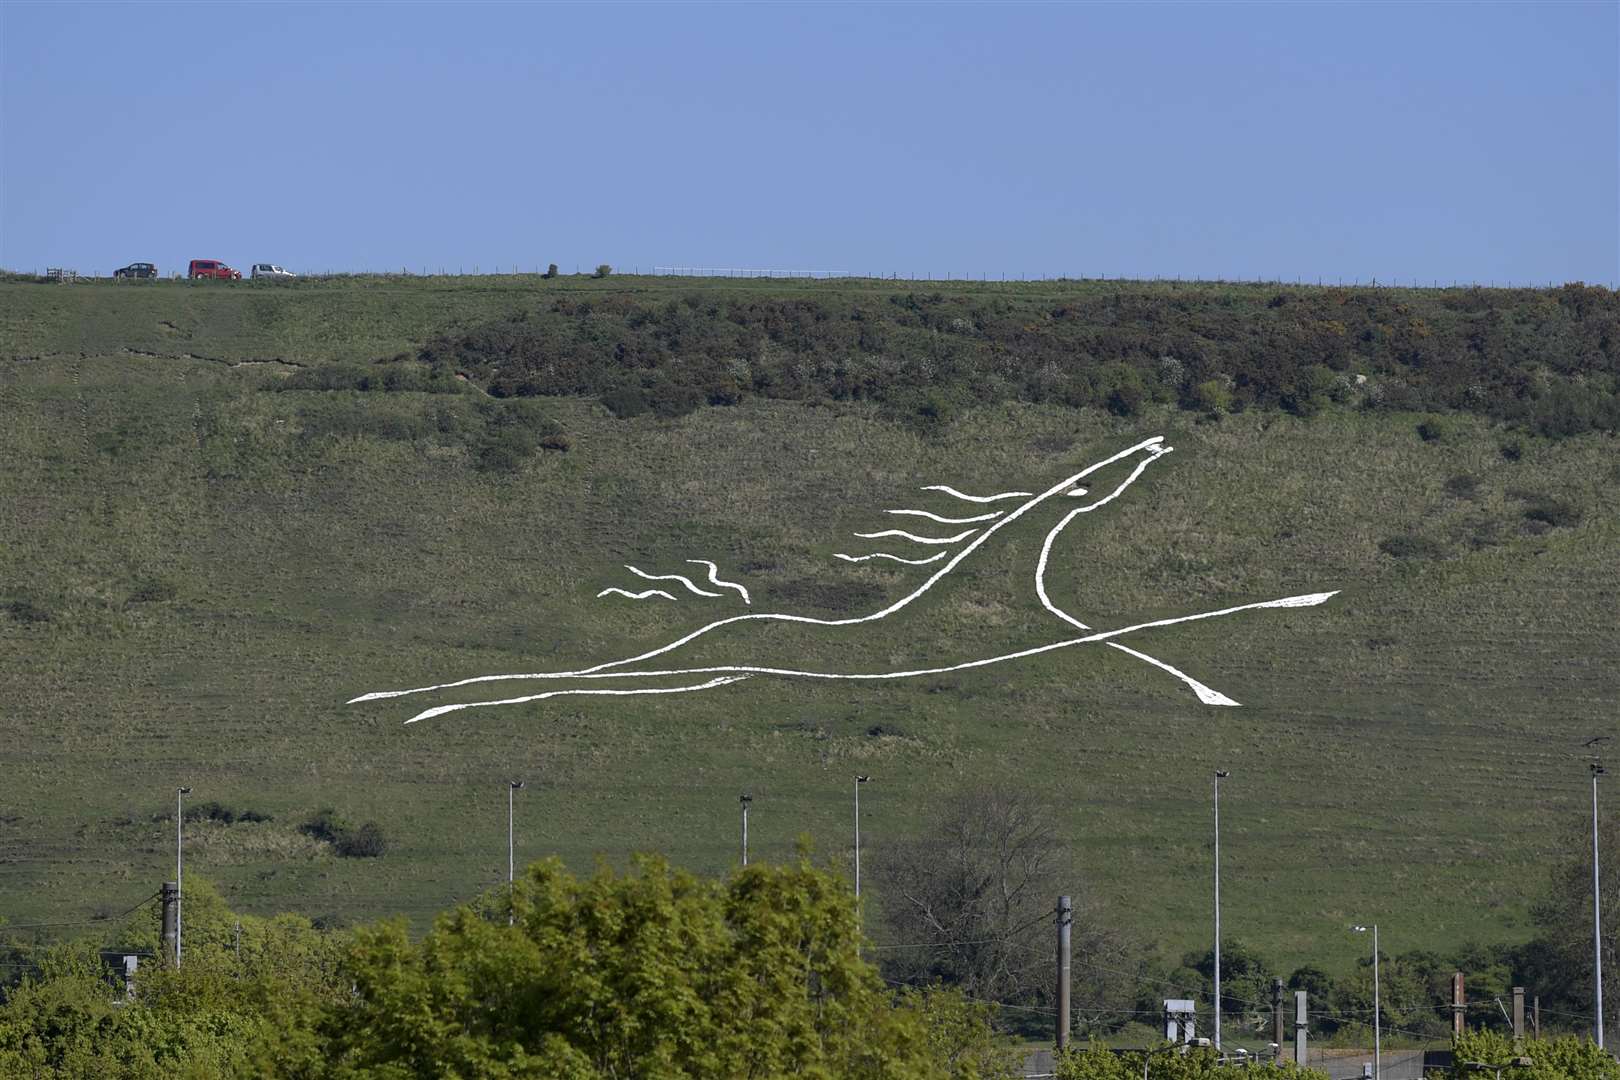 The white horse at Cheriton. Picture: Barry Goodwin